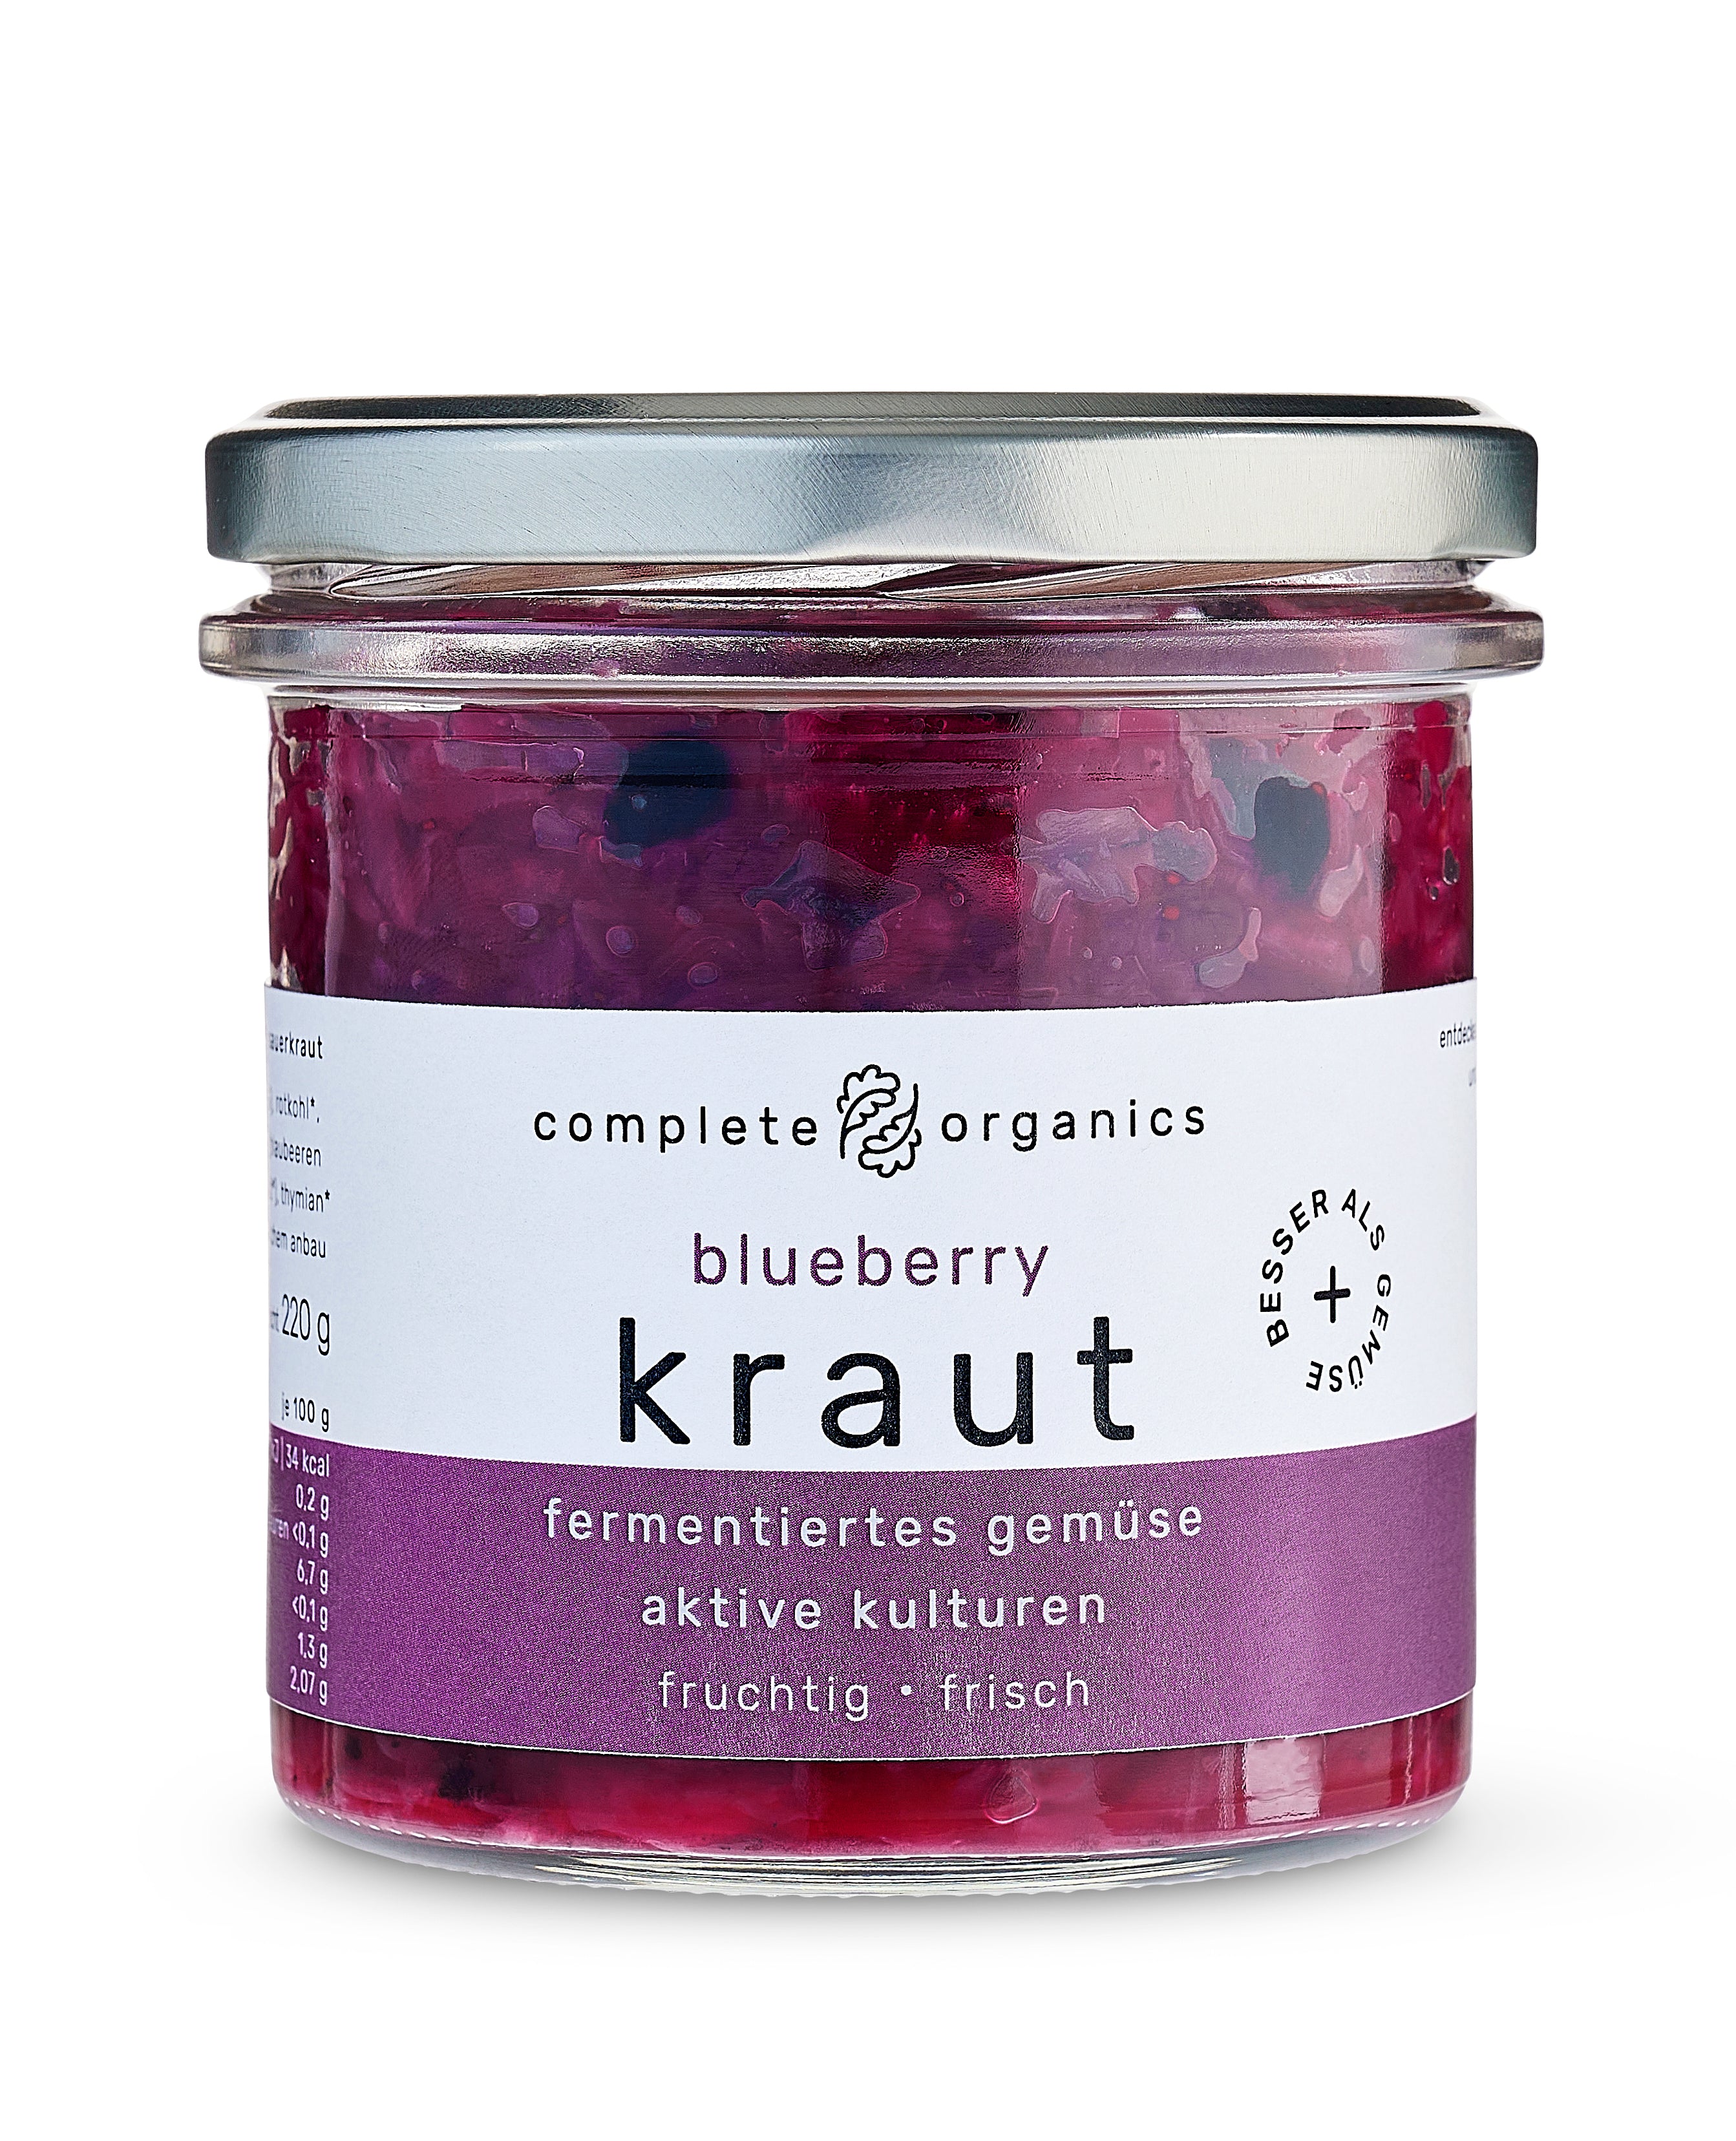 the kraut with cranberries